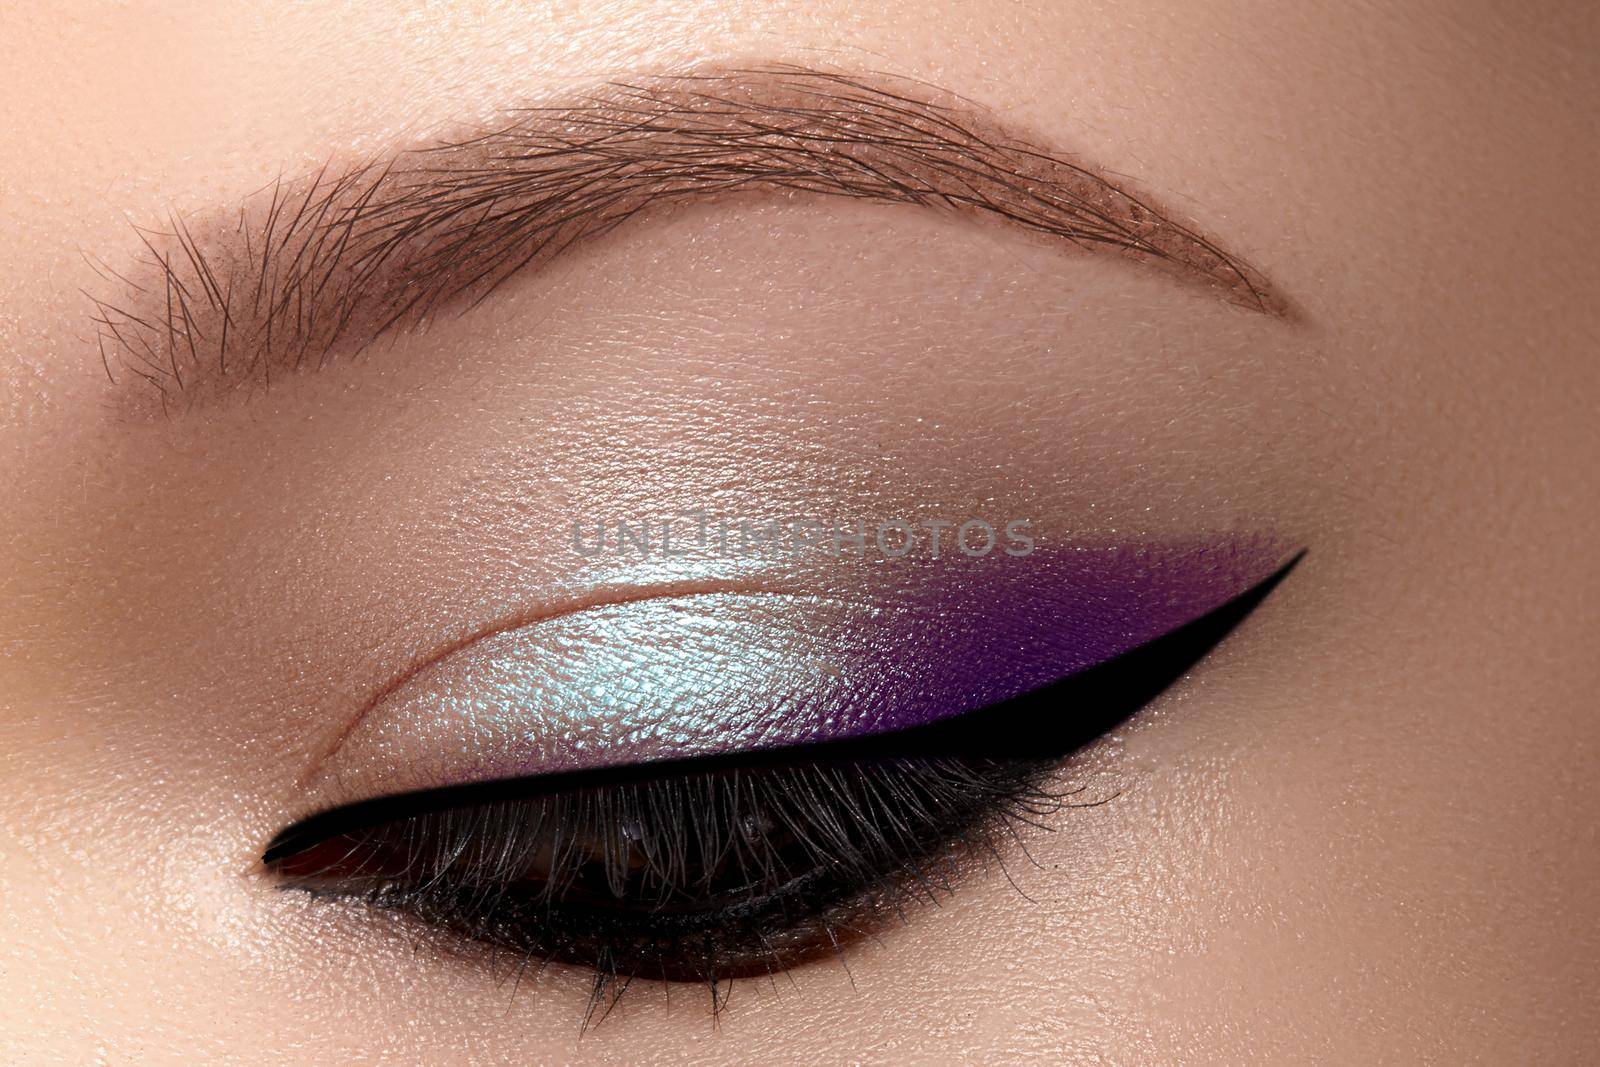 Celebrate Beautiful Macro Eyes with Smoky Cat Eye Makeup. Cosmetics and Make-up. Closeup of Fashion Visage with Liner, Purple and Cyan Eyeshadows.